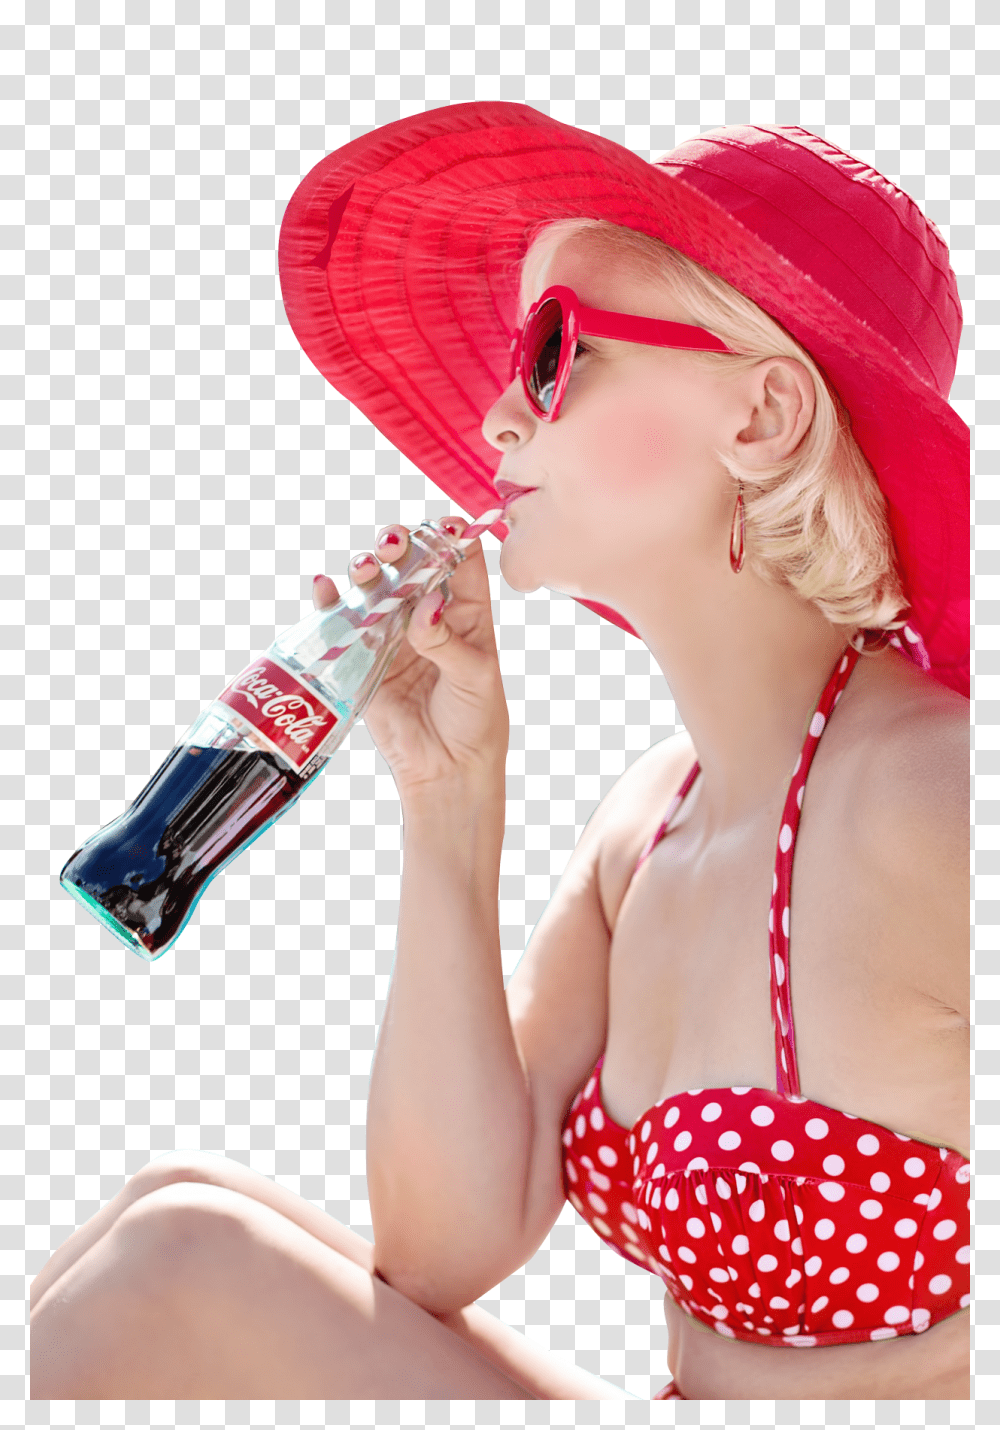 Sexy Woman Drinking Coca Cola Drink Image, Person, Apparel, Sunglasses Transparent Png